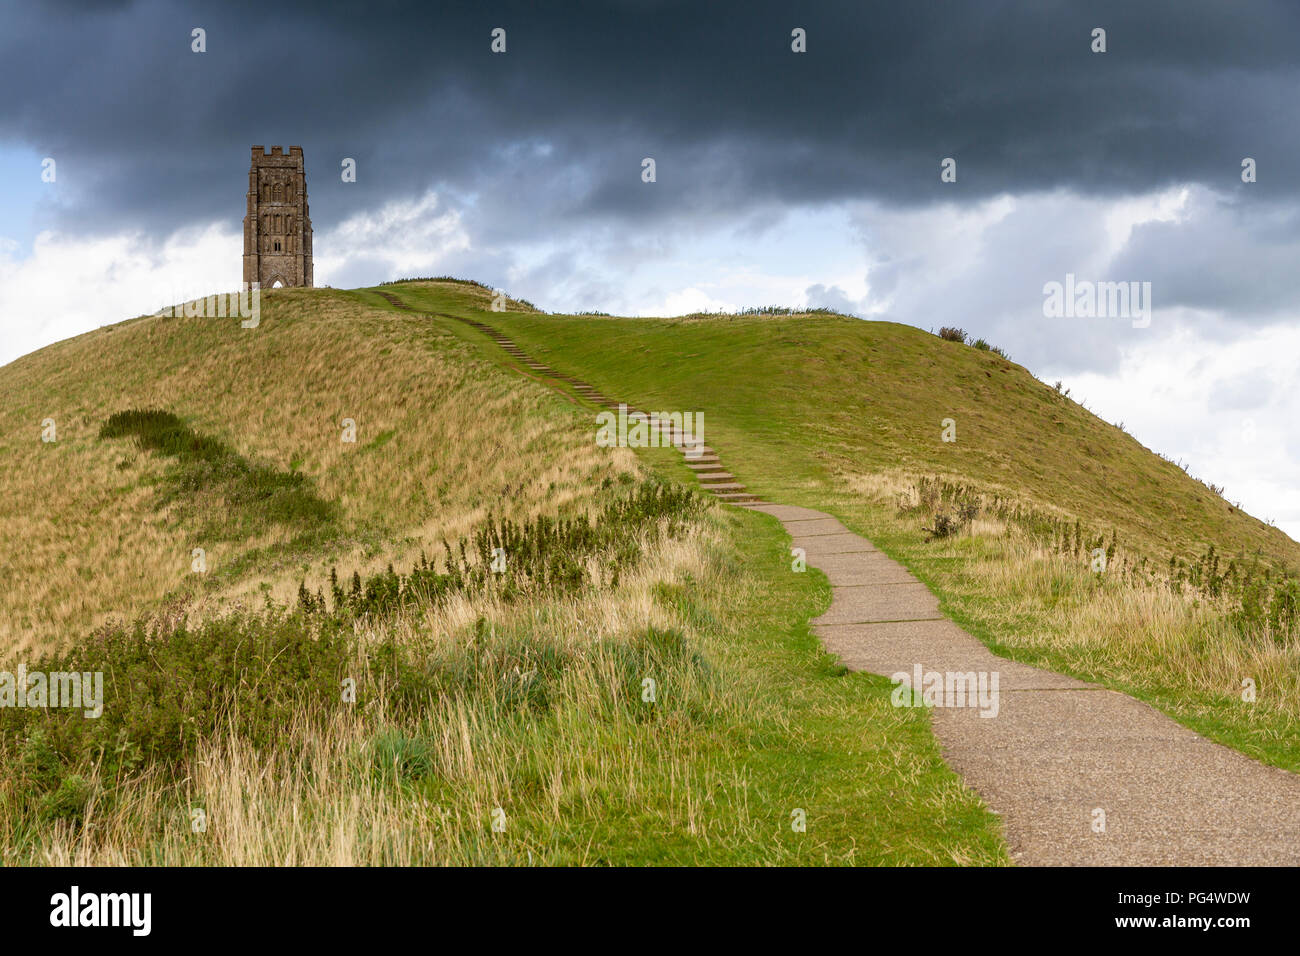 St Michaels Tower and Glastonbury Tor under a stormy sky. Stock Photo